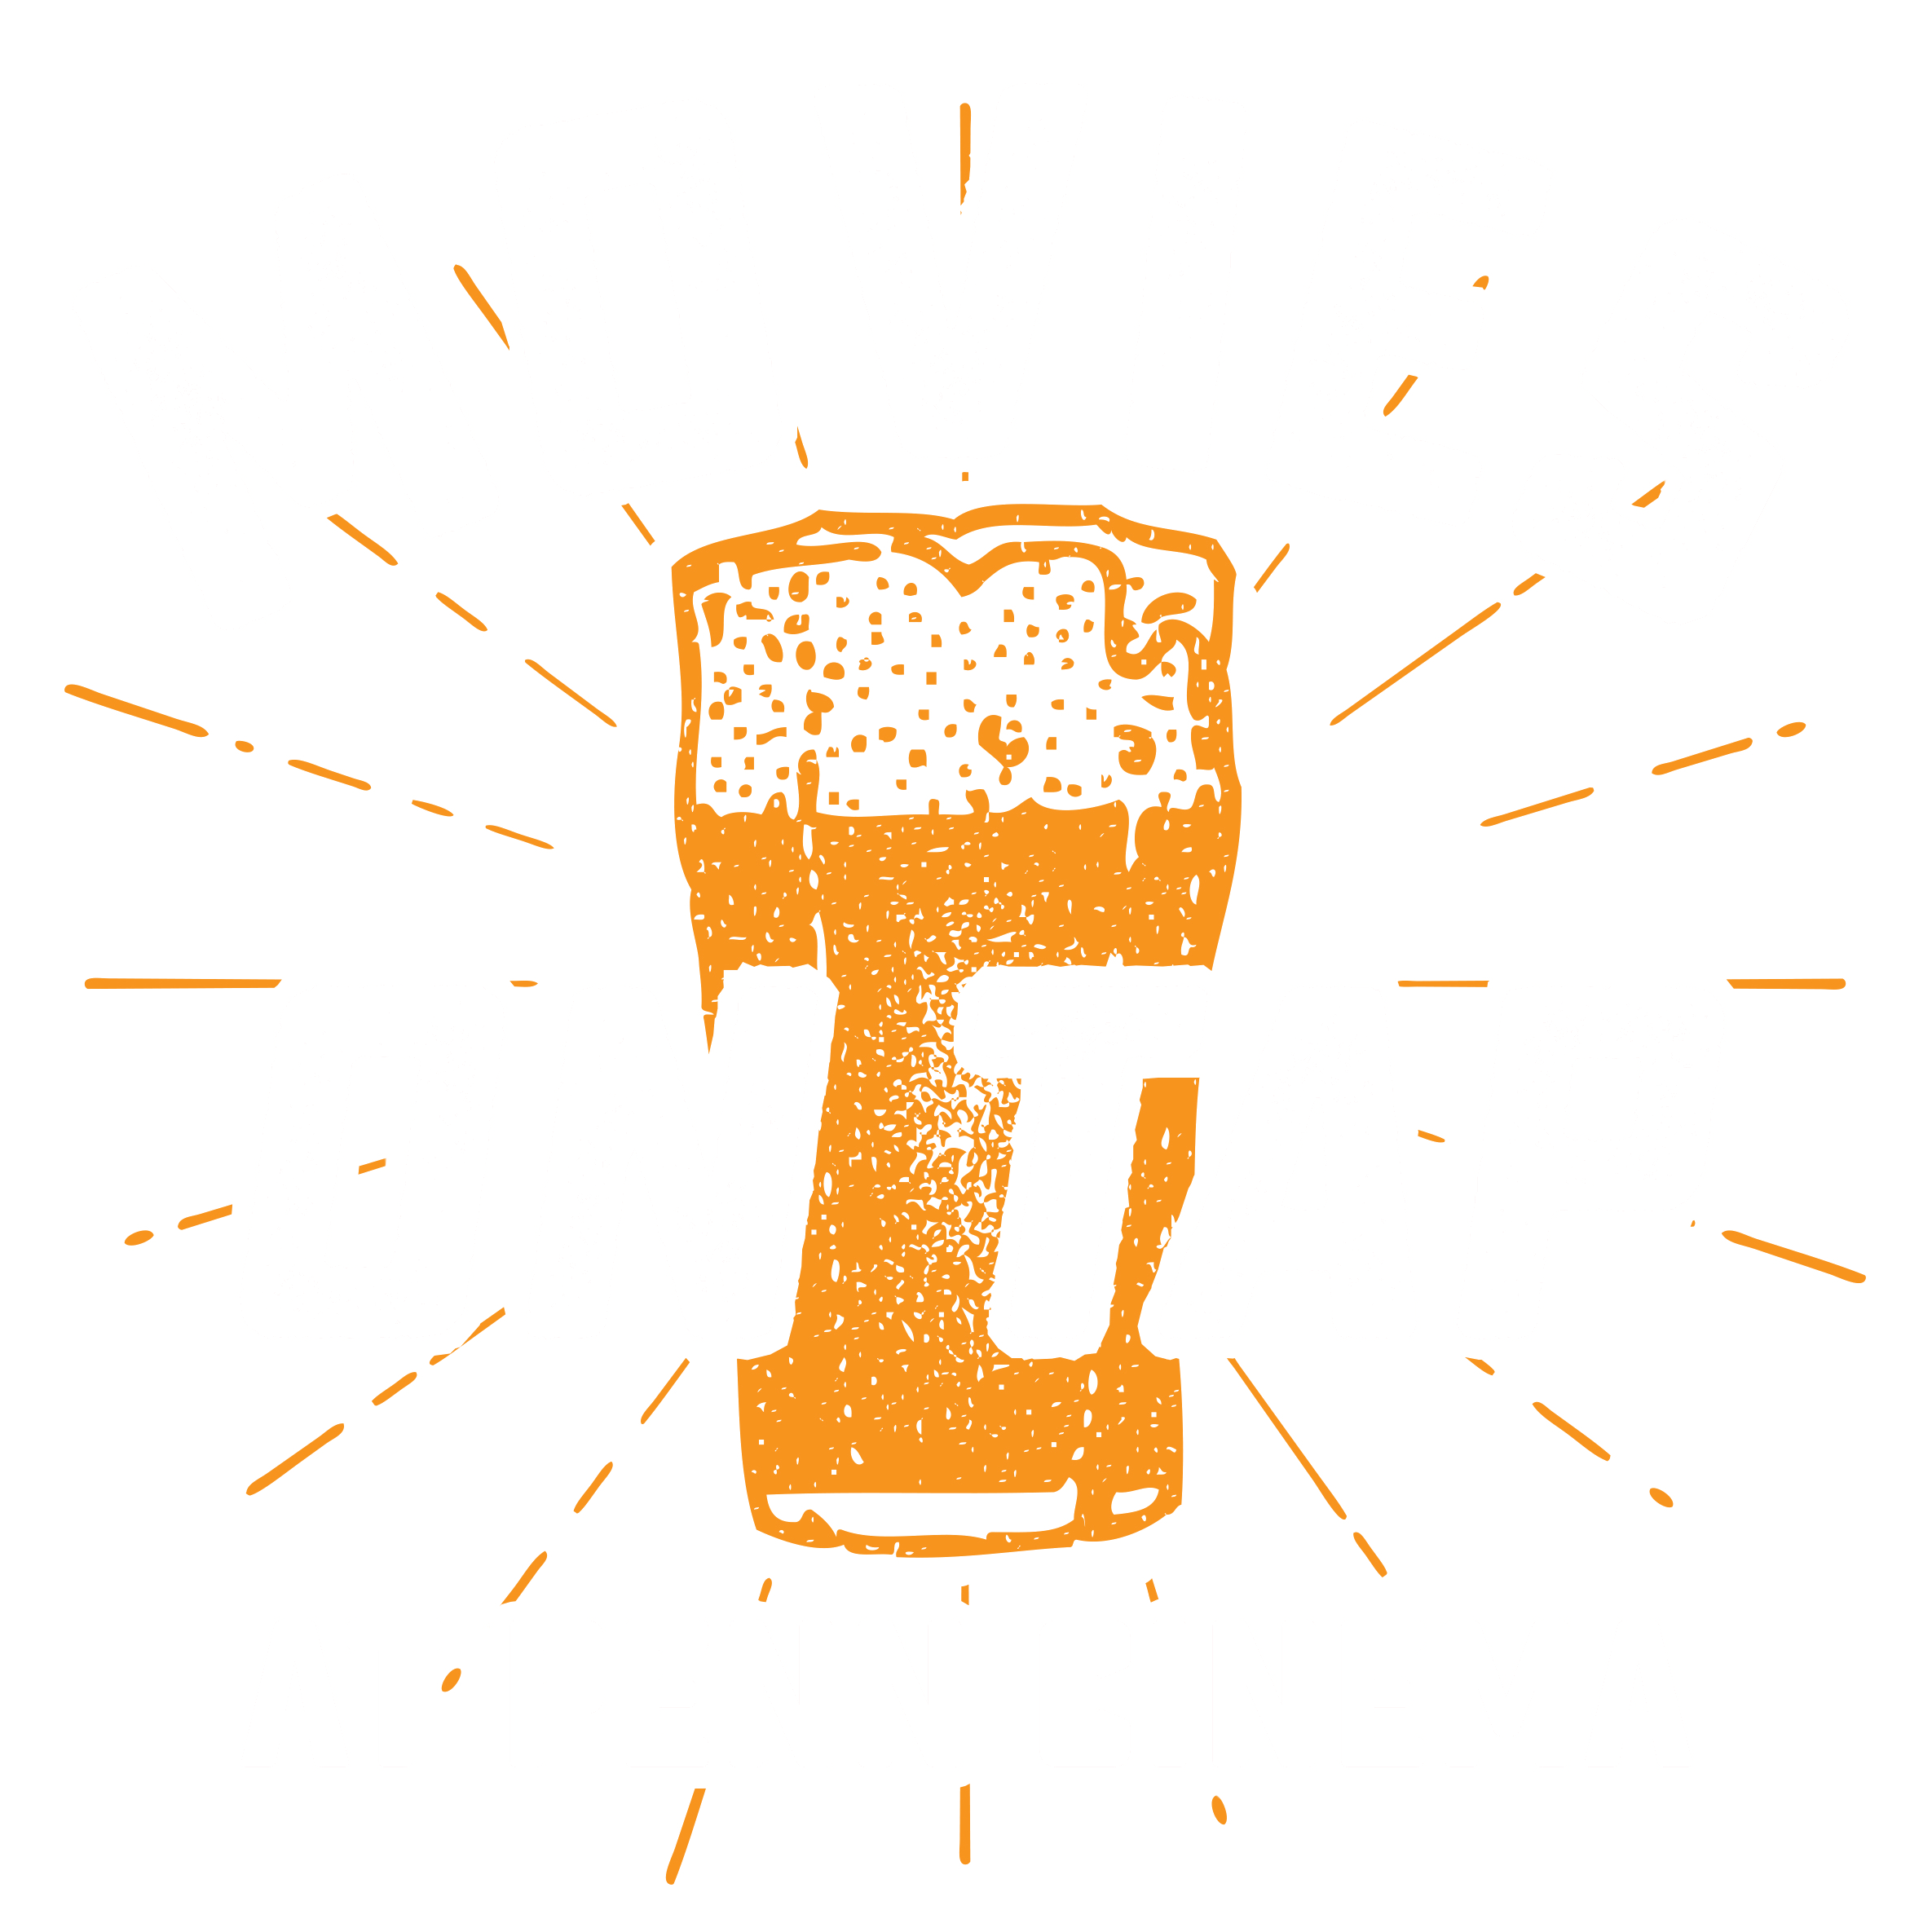 Movies On Tap